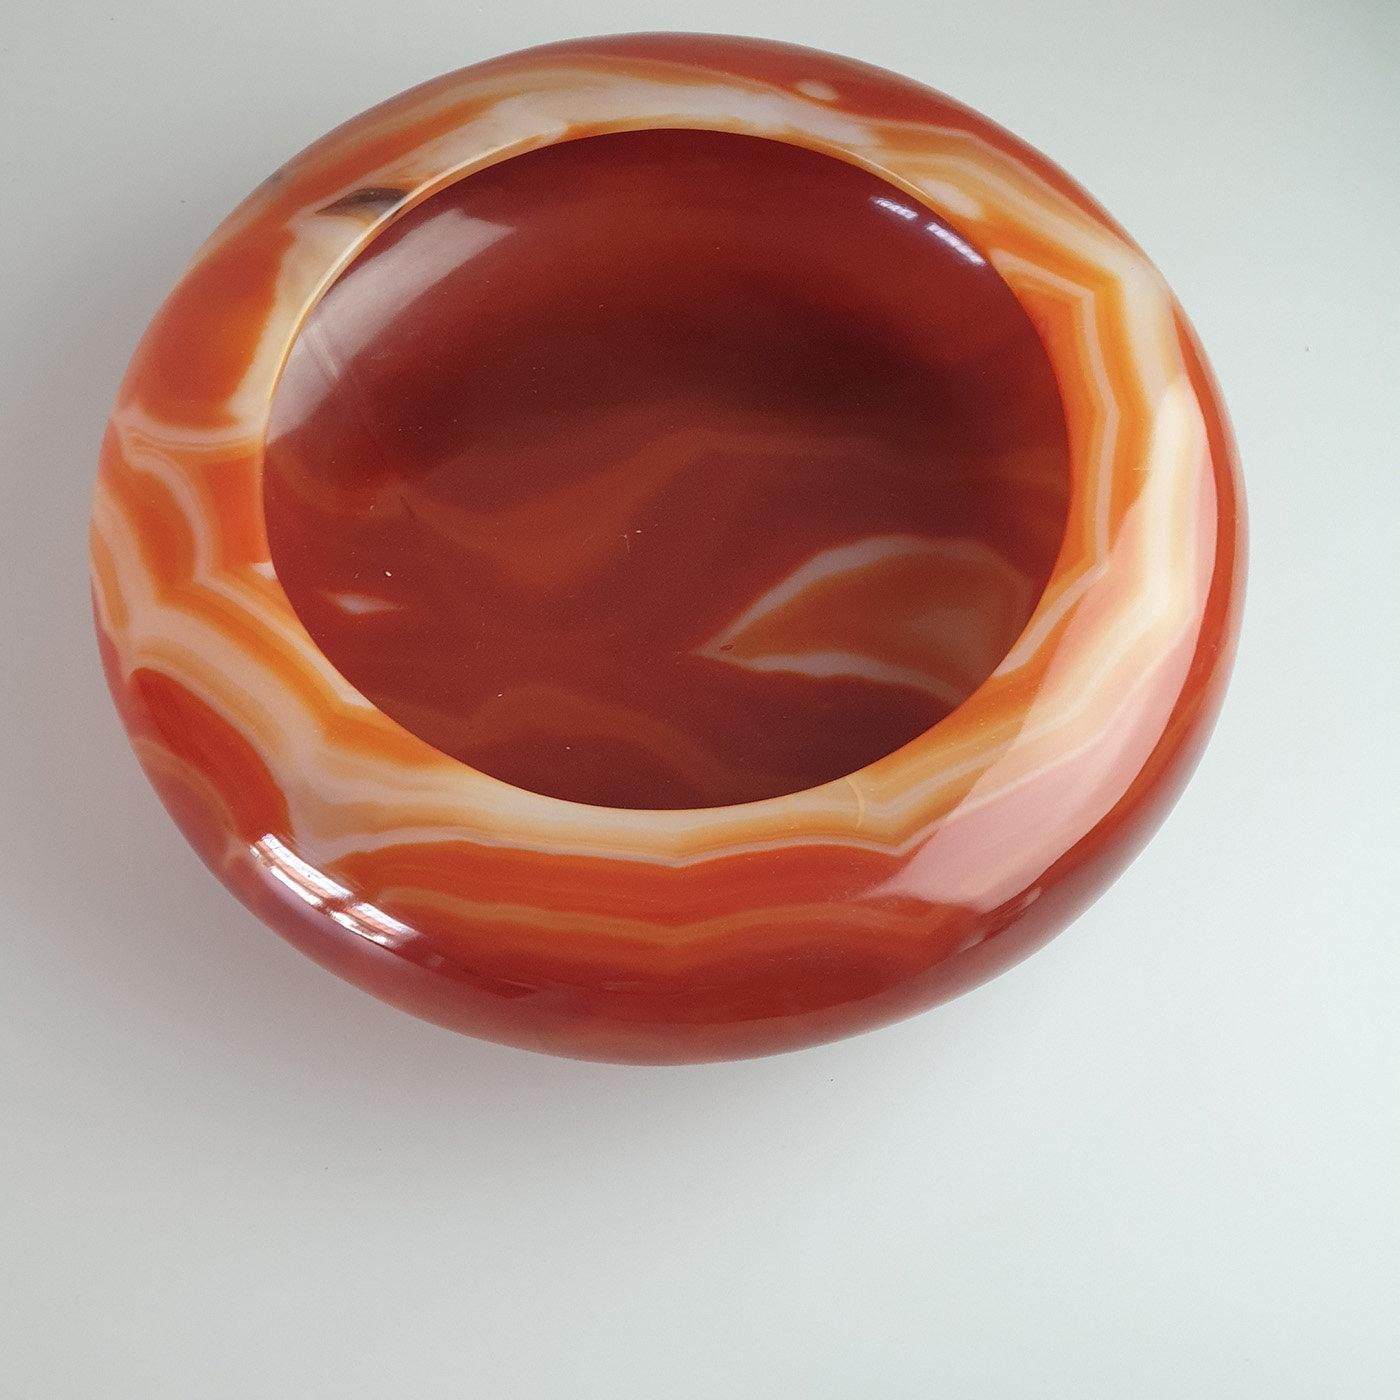 Accurately manufactured from a single piece of brilliant carnelian agate, this vide-poche bowl is a one-of-a-kind piece of decor. Adorned with delicately rounded edges, it features a range of colors, from a dark red to a rusty brown and pale-pink.